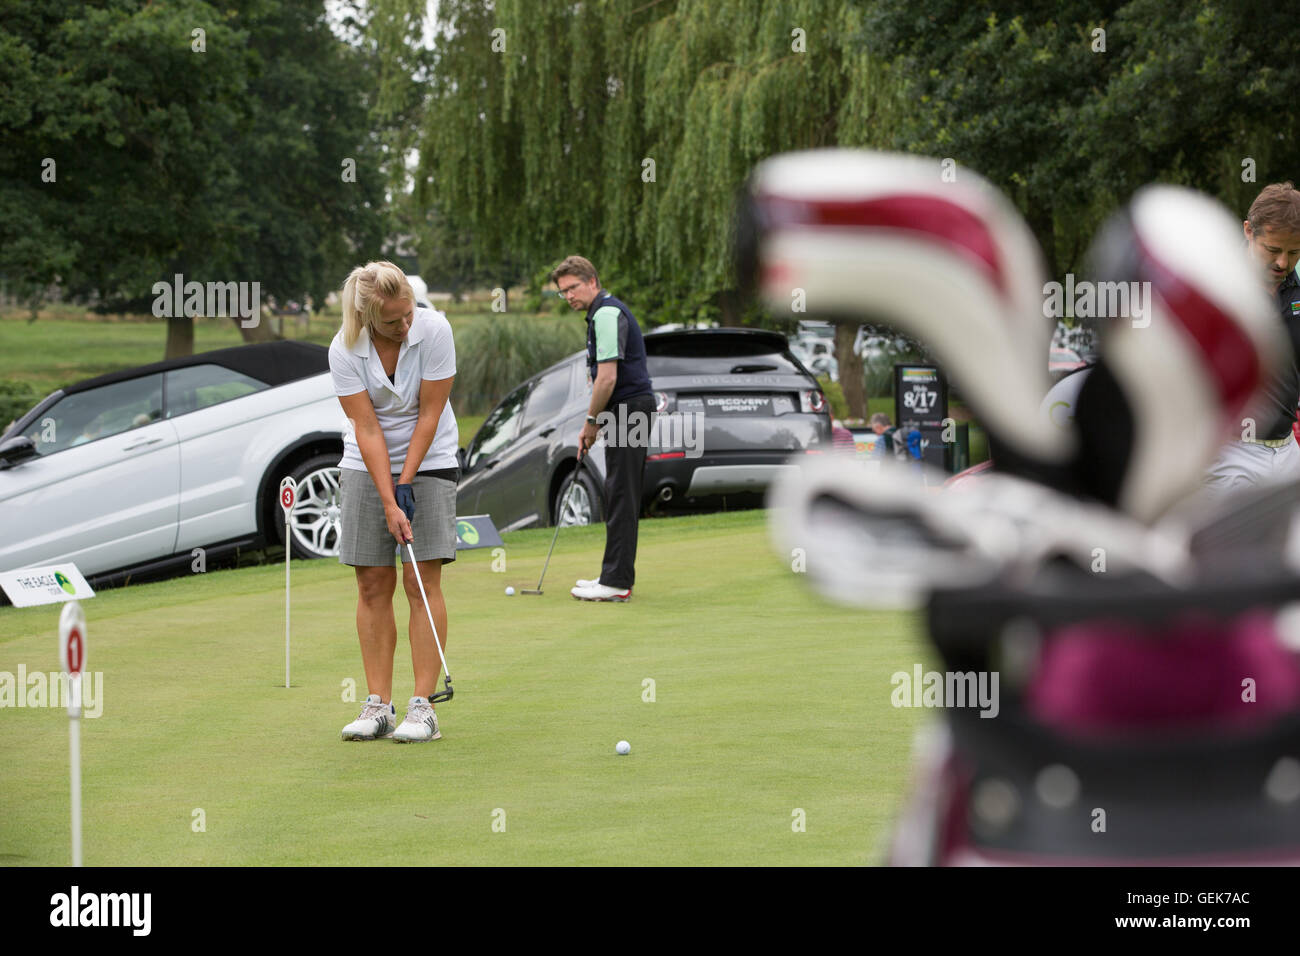 Warwickshire, UK. 26th July, 2016. Farm Foods British Par 3 Championship at Nailcote Hall in Warwickshire. Gail Emms MBE on the practise green before teeing off. Credit:  steven roe/Alamy Live News Stock Photo